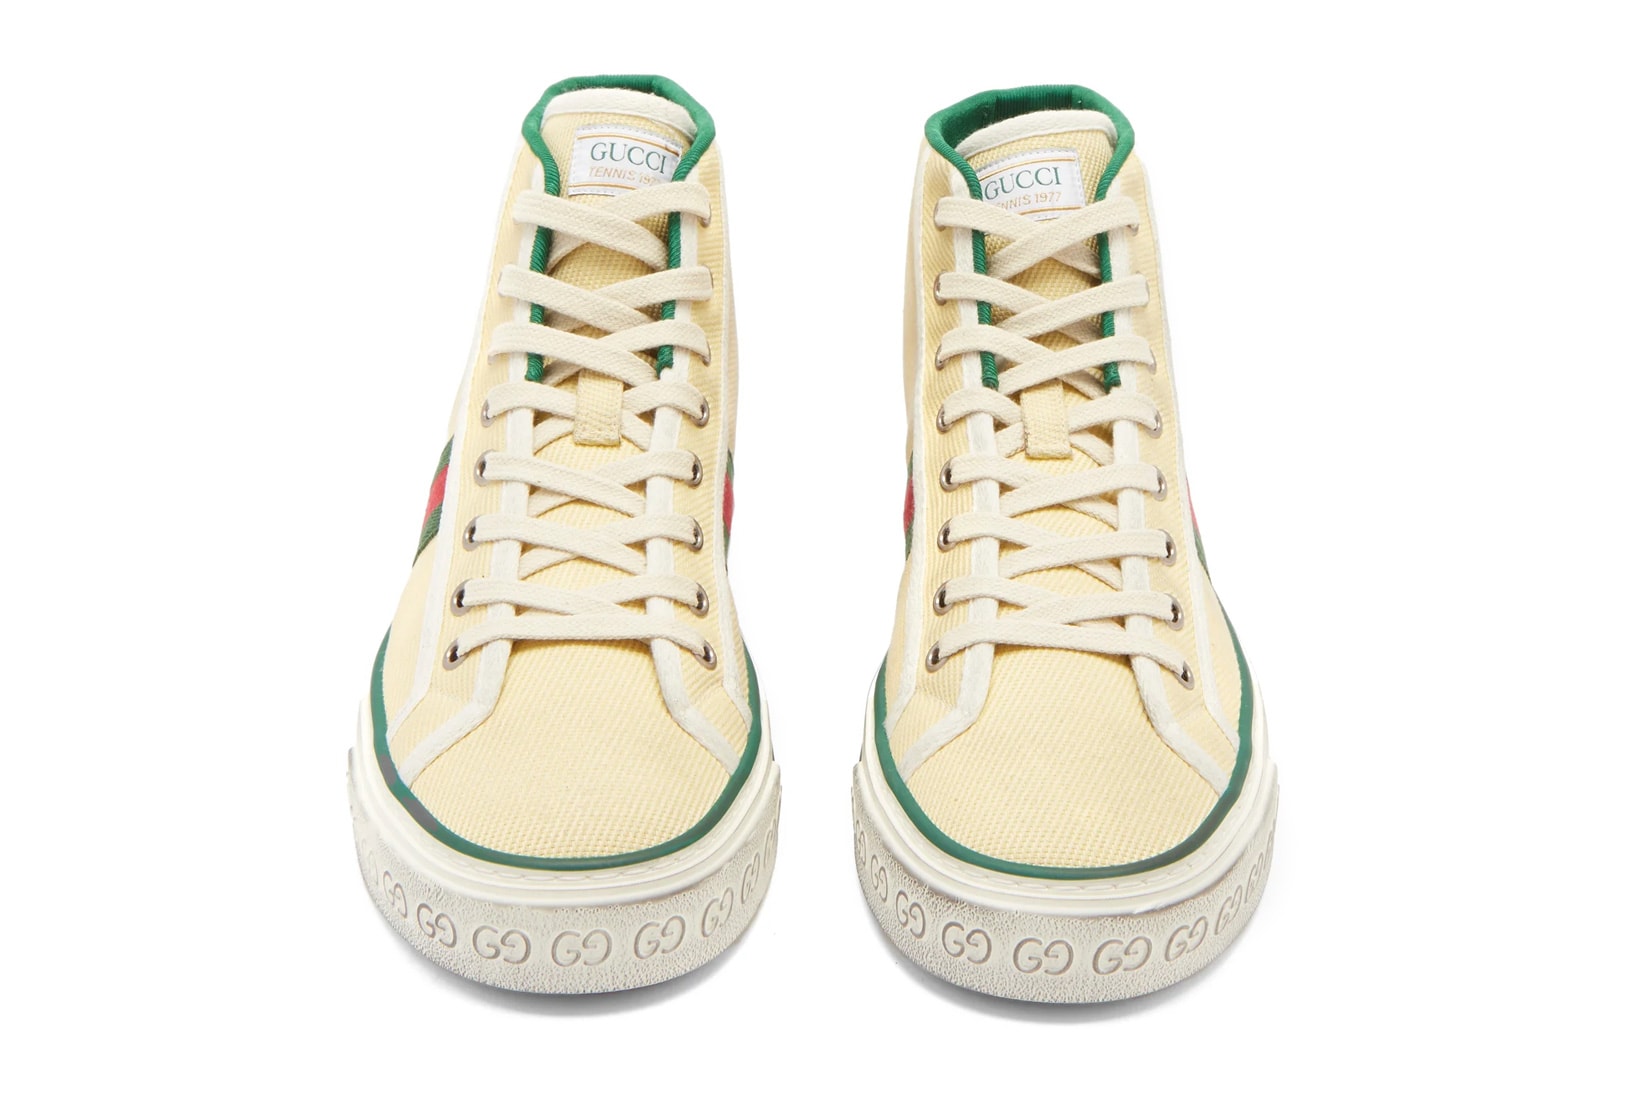 gucci tennis 1977 high-top sneakers canvas ivory green red stripes price info